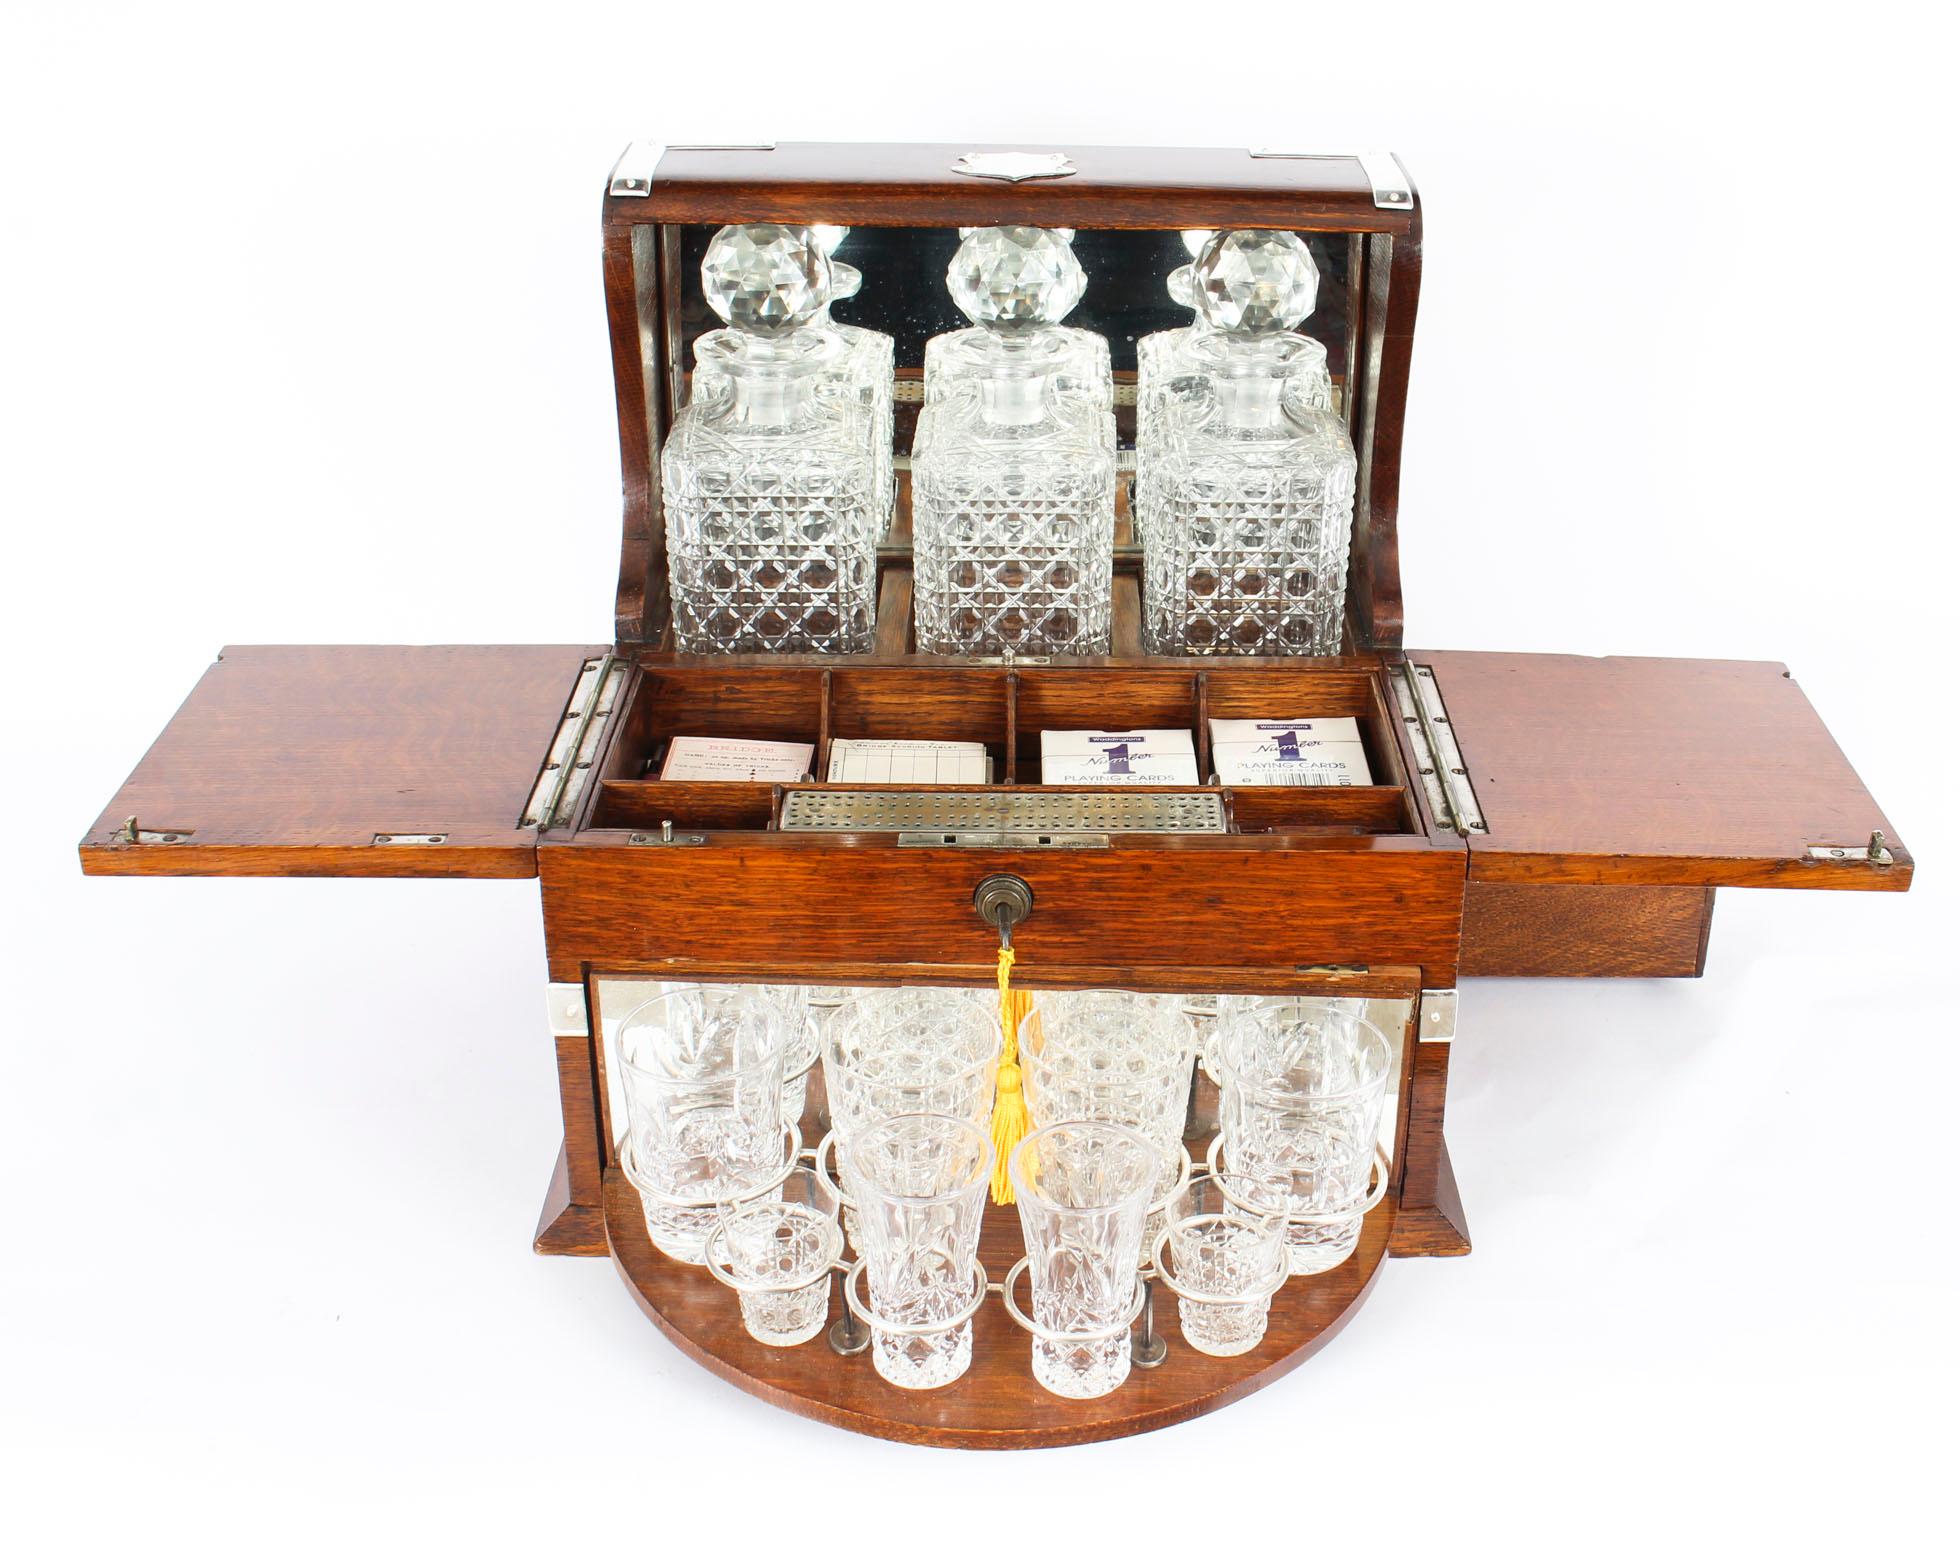 This is a superb antique Victorian oak cased three decanter tantalus with decorative silver plated cut brass mounts and carry handles to the sides, circa 1870 in date.

This magnificent tantalus features three wonderful hobnail cut square